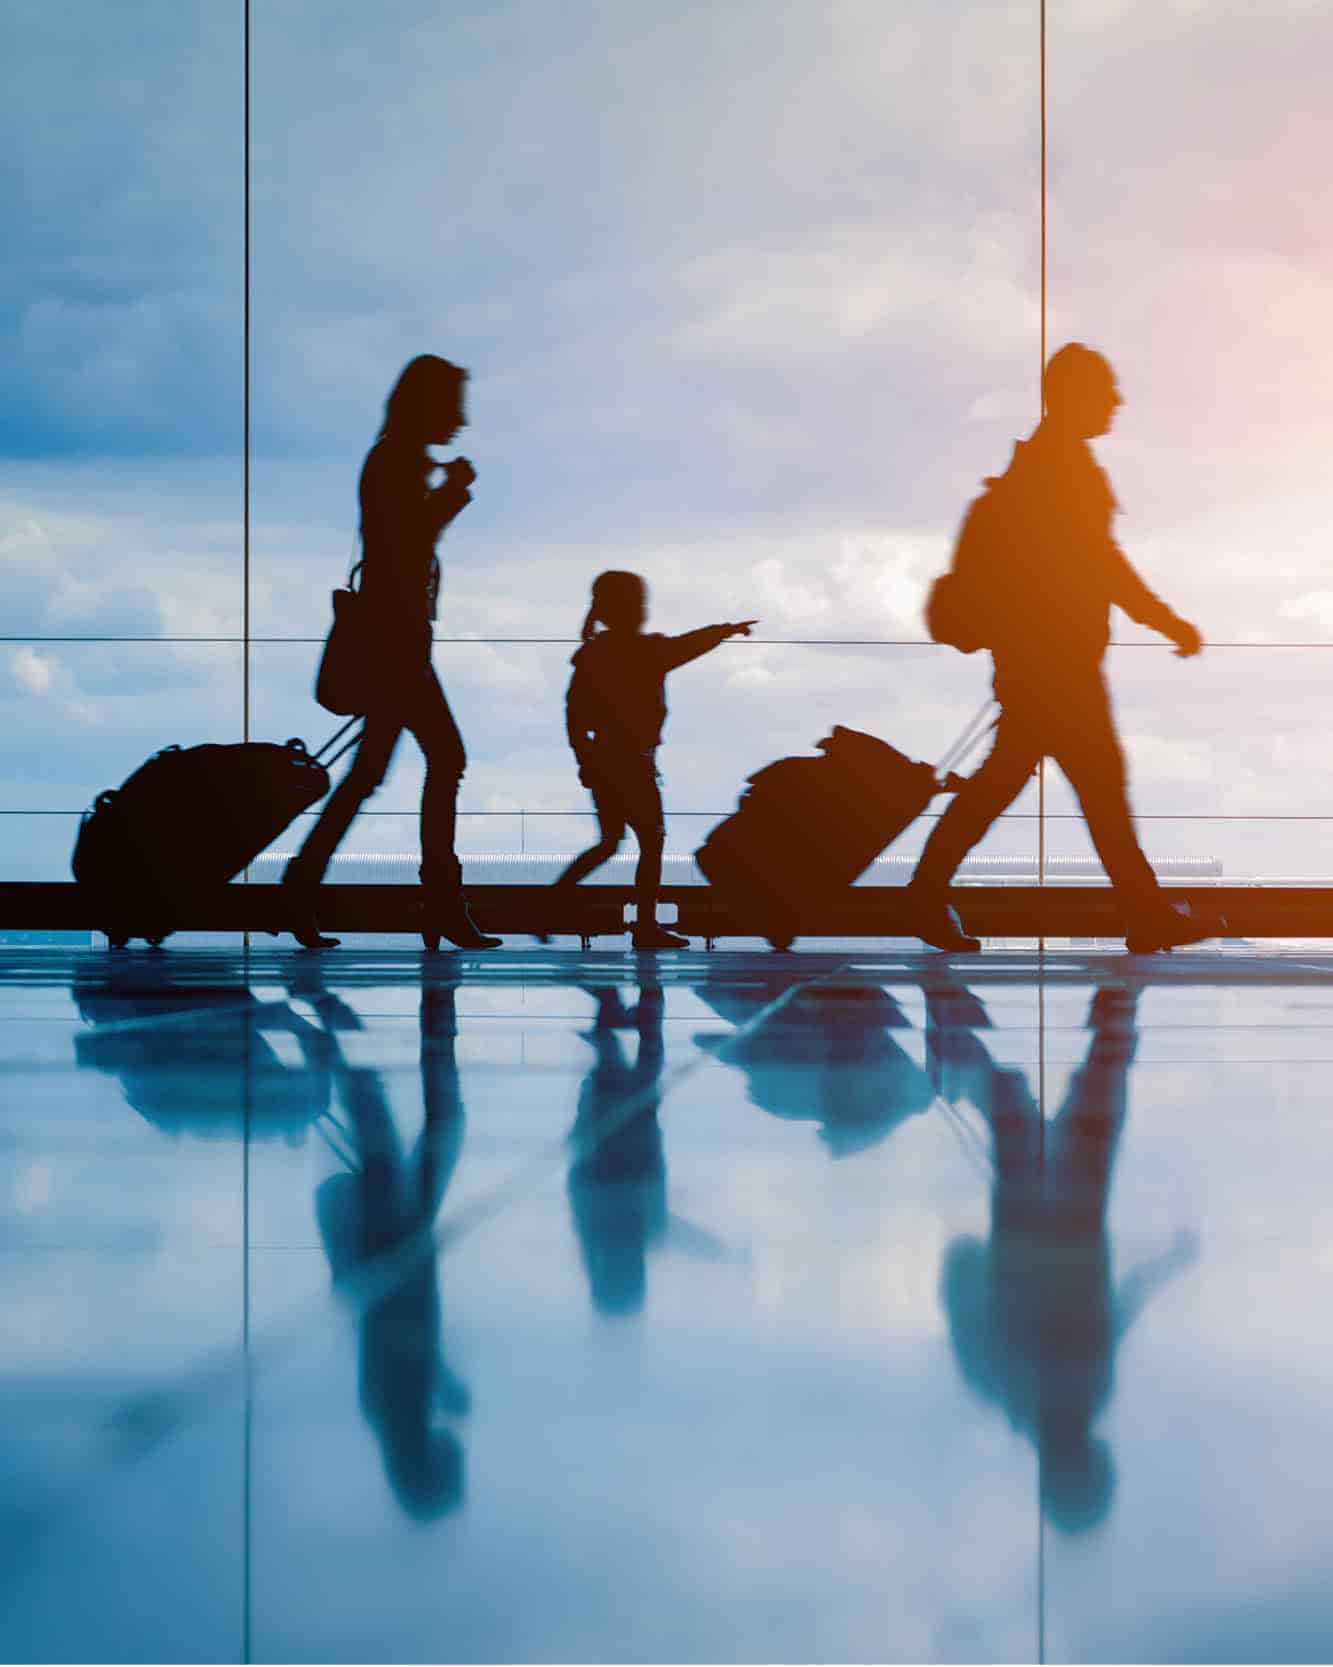 Two parents and a child silhouette are walking through an airport in front of scenic windows. They are carrying luggage. 